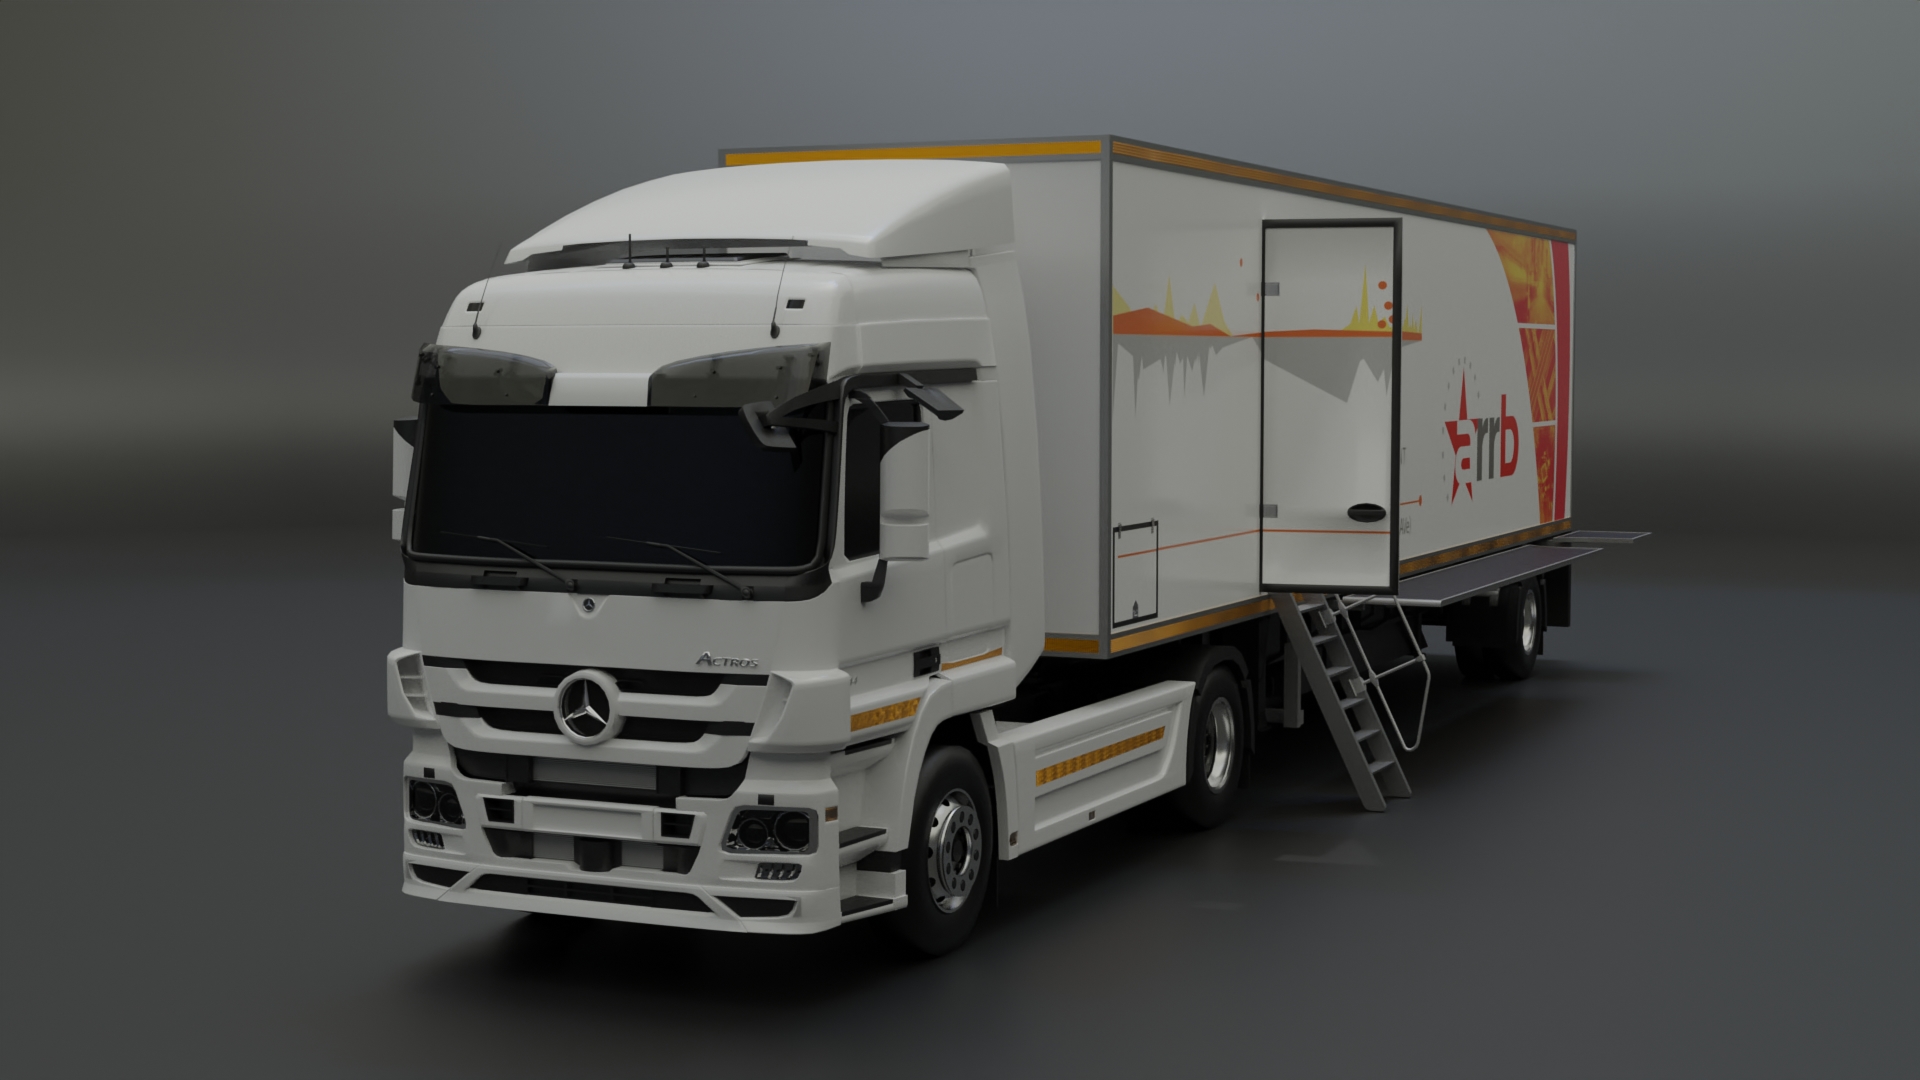 Immersive VR Experience by Virtual Reality South Africa Showcases Trucks and Technology